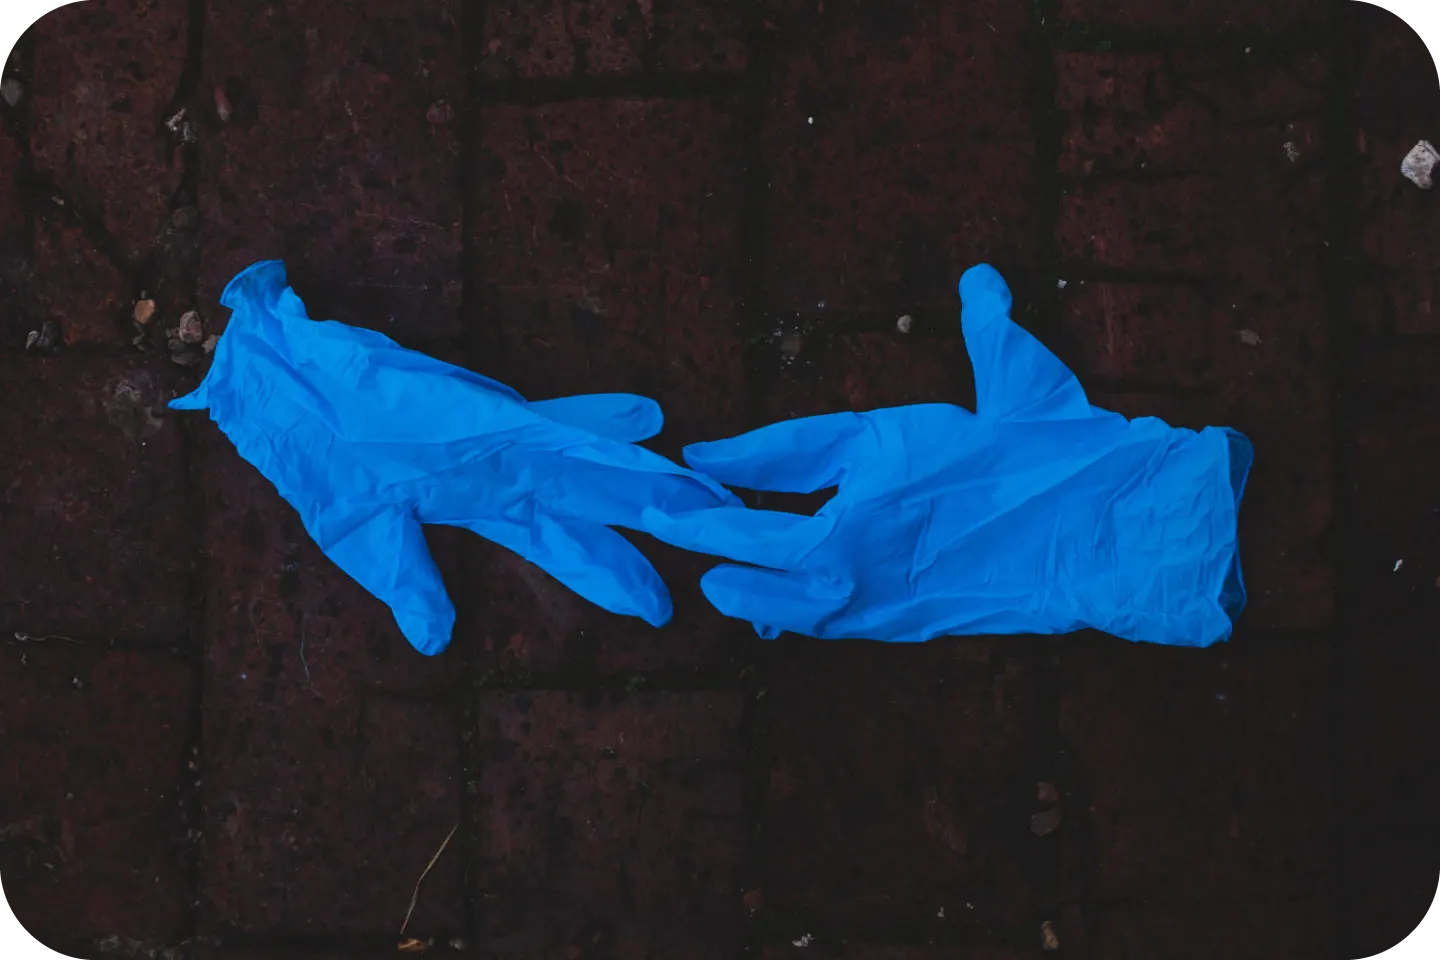 How to dispose of nitrile gloves?